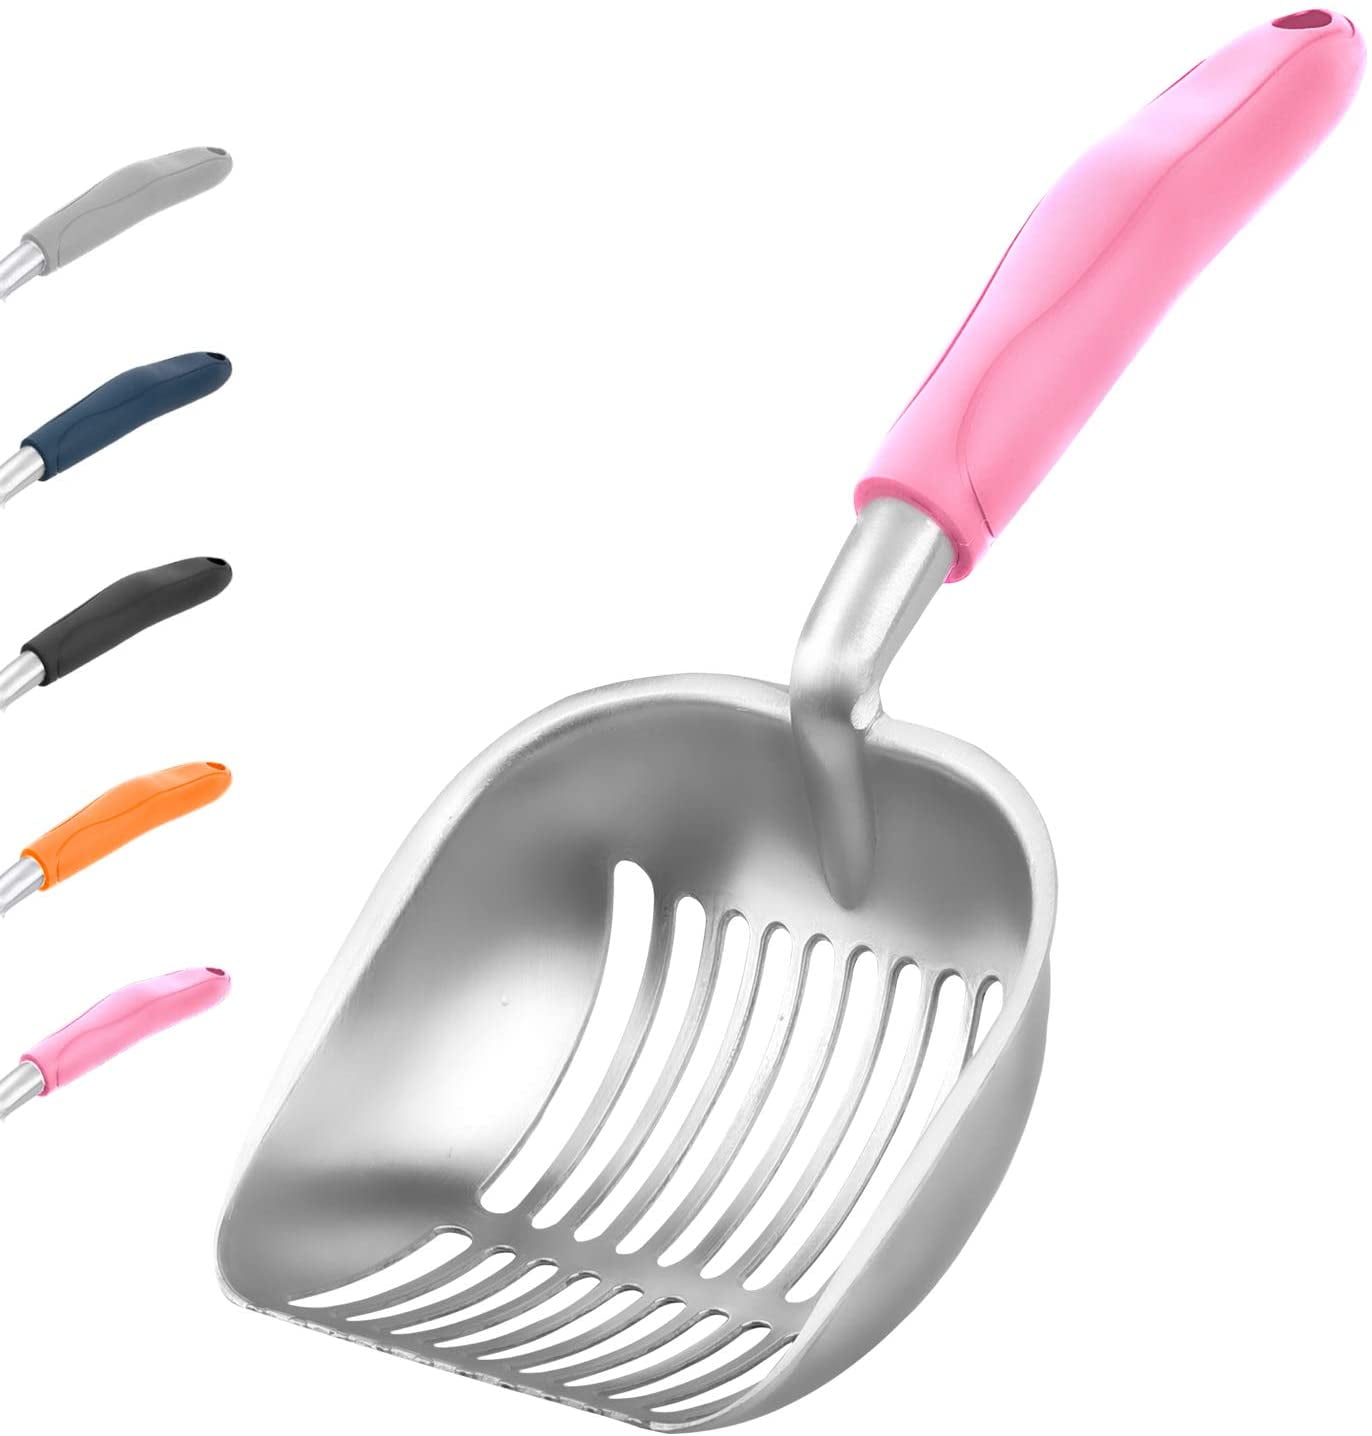 DuraScoop Jumbo Cat Litter Scoop All Metal End-to-End w/ Solid Core colors vary 